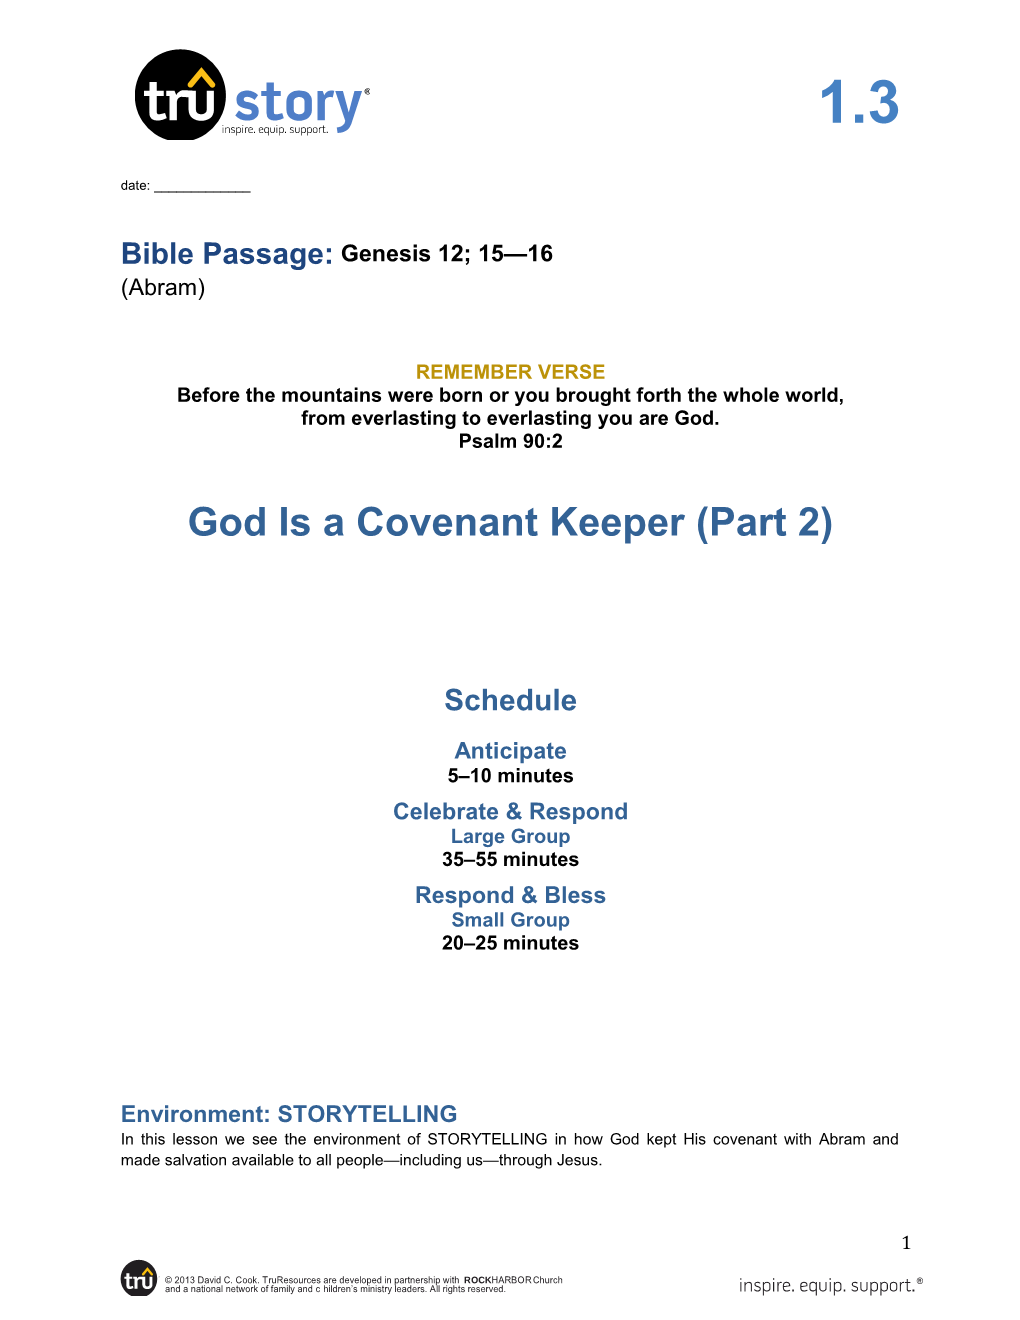 God Is a Covenant Keeper (Part 2)